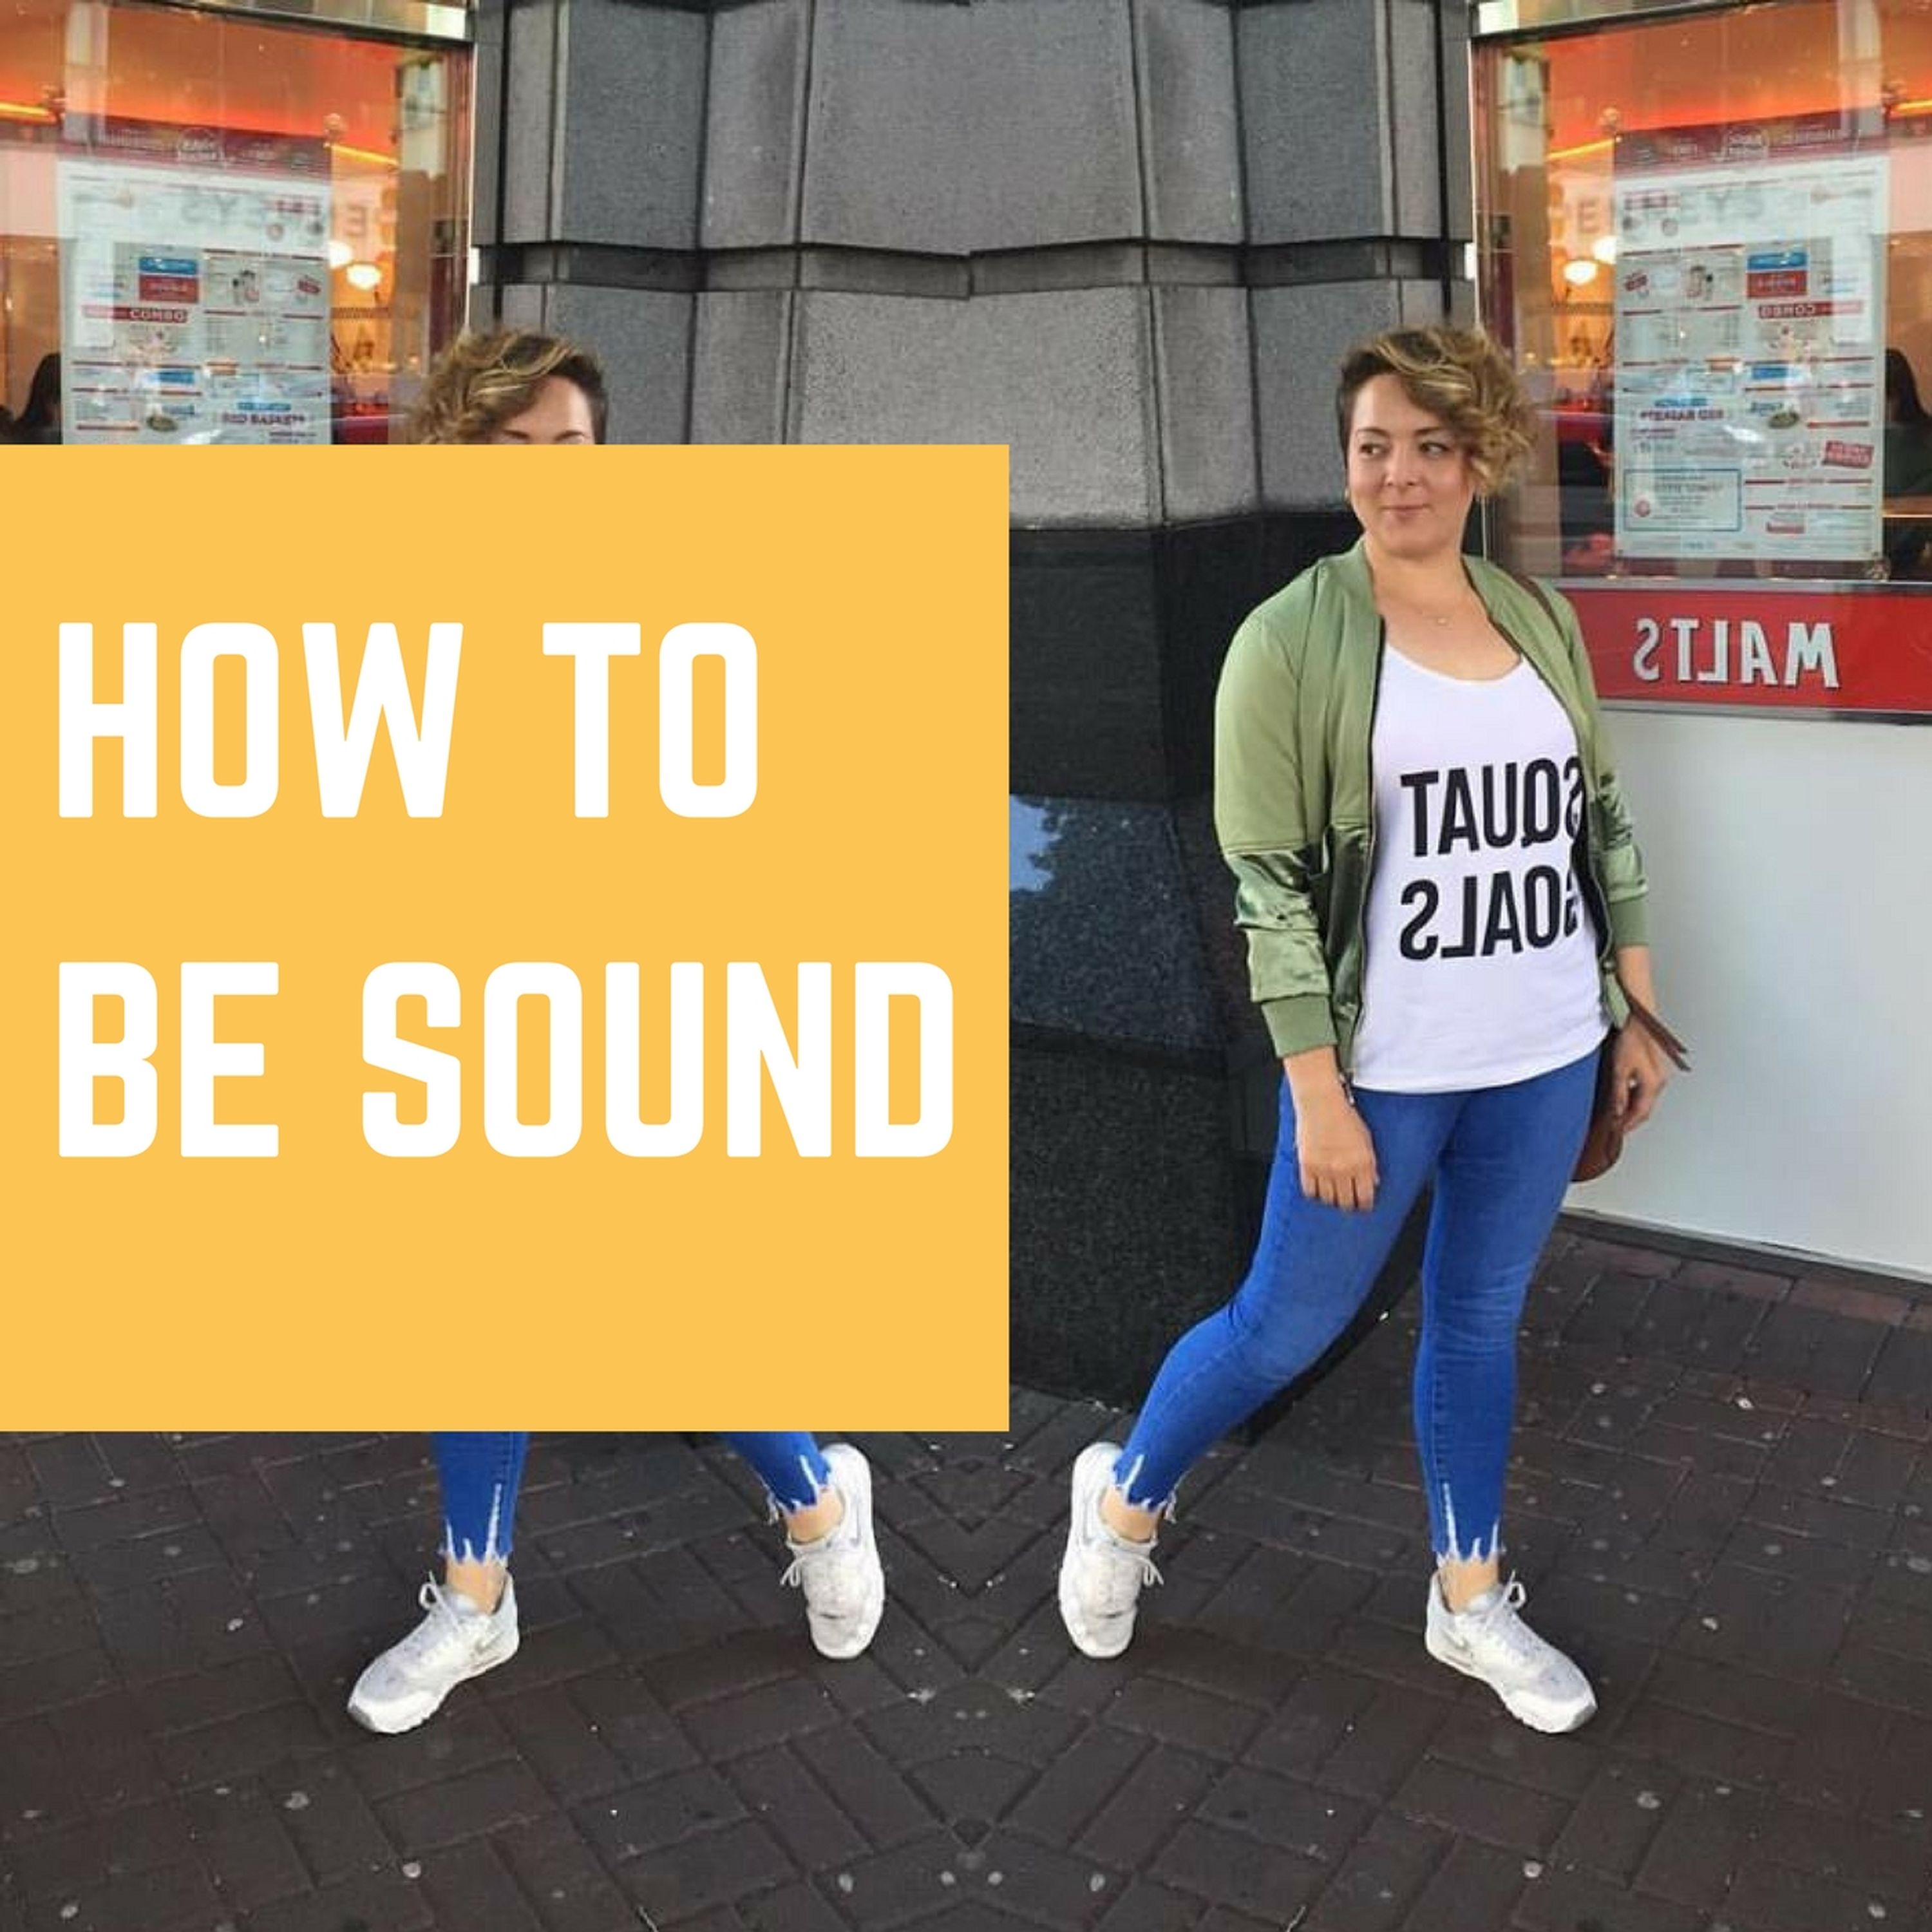 Lynn Enright on how to be sound